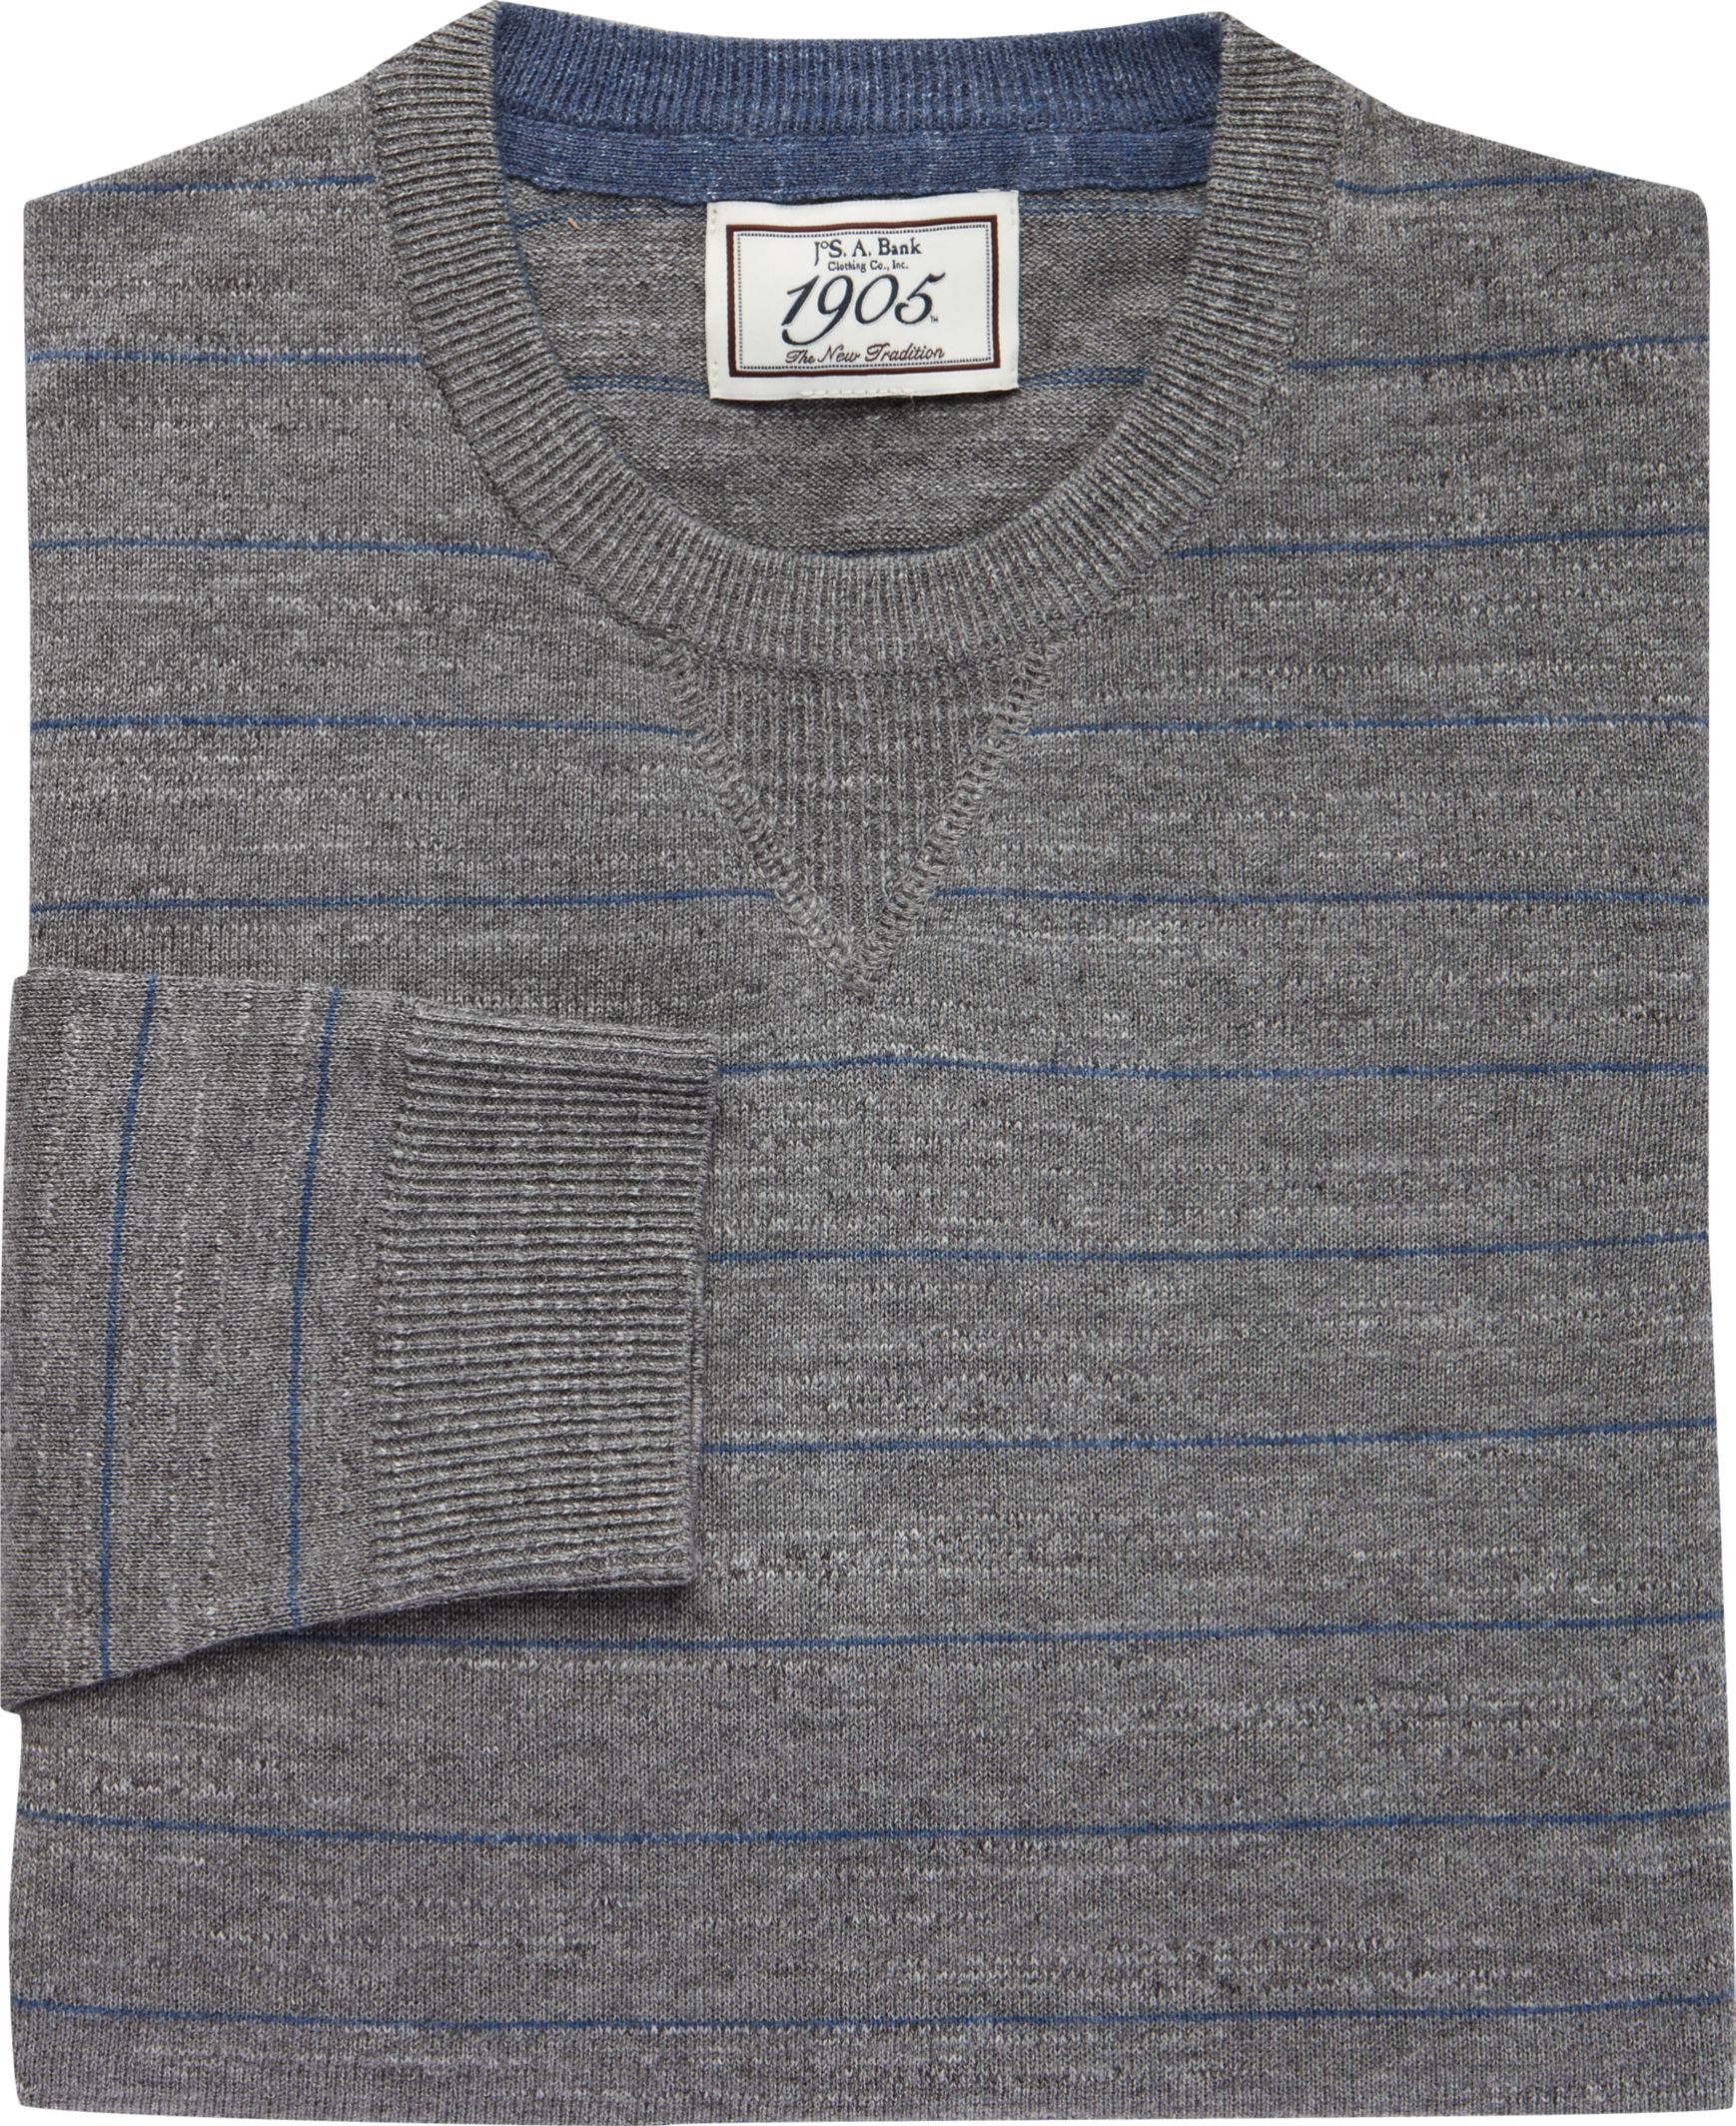 1905 Collection Cotton Crew Neck Sweater - Big & Tall CLEARANCE - $29 ...